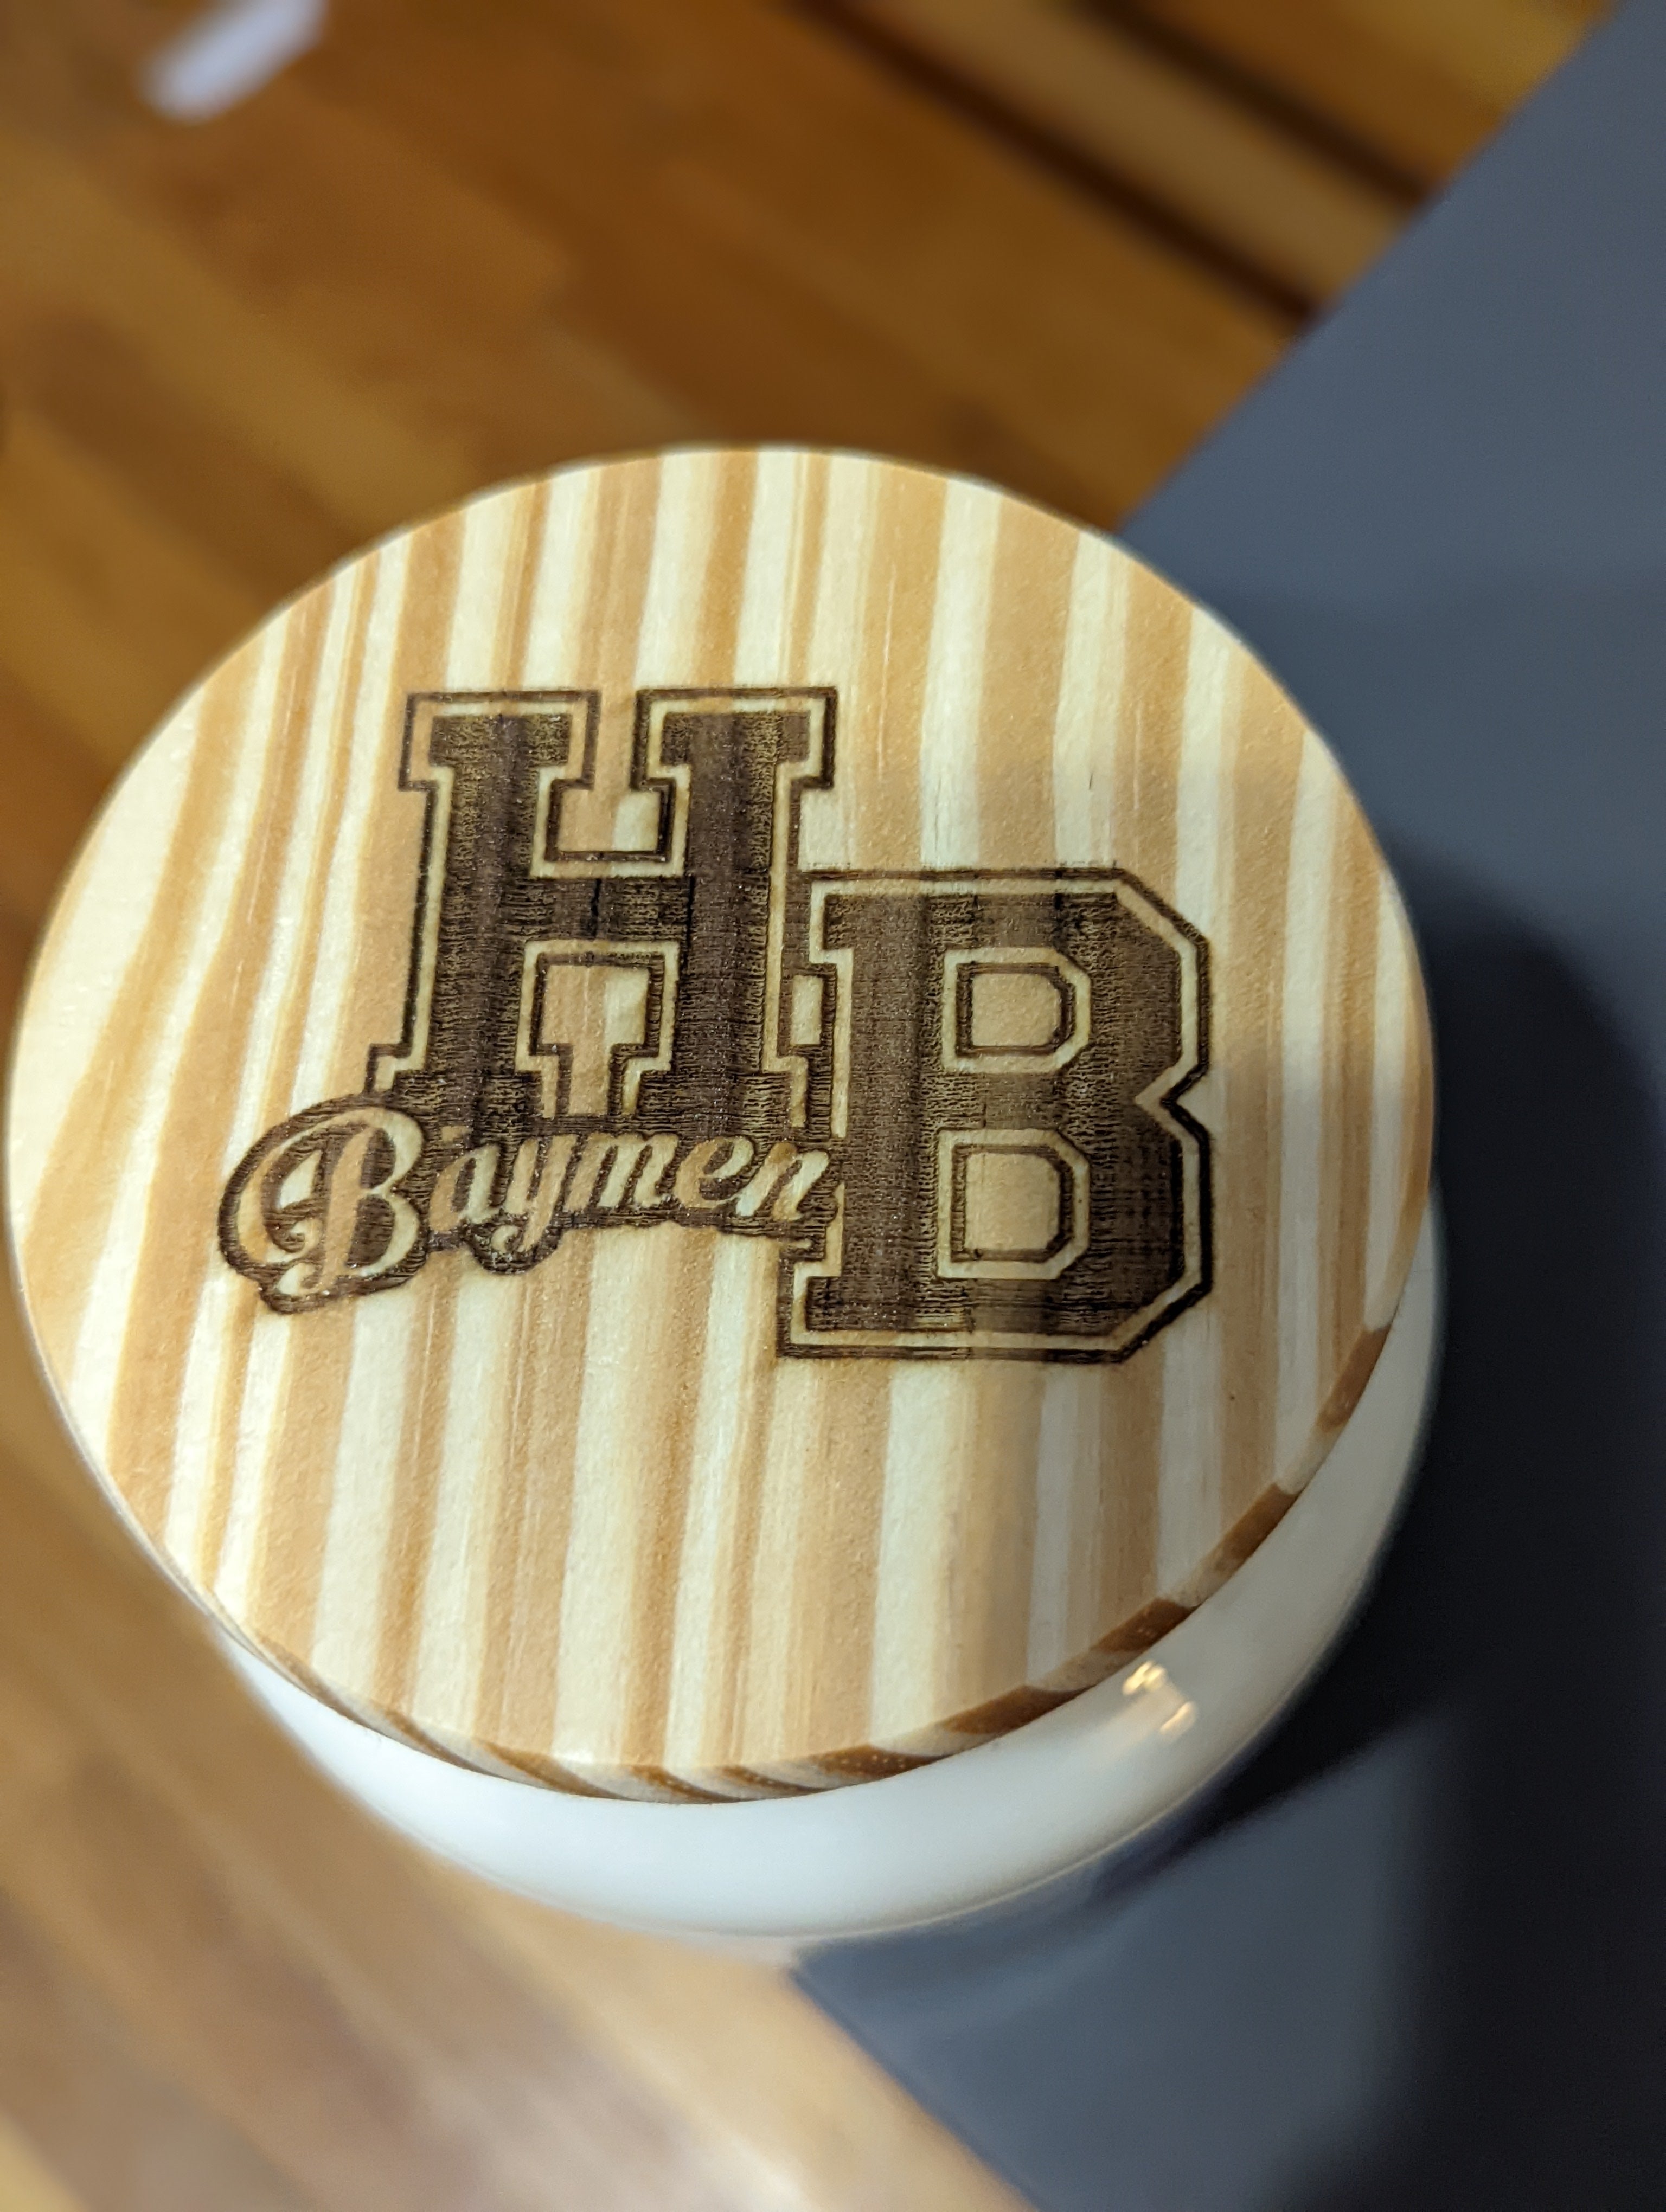 This is a custom branded candle lid for the Hampton Bays school. It has the school logo engraved in the lid.